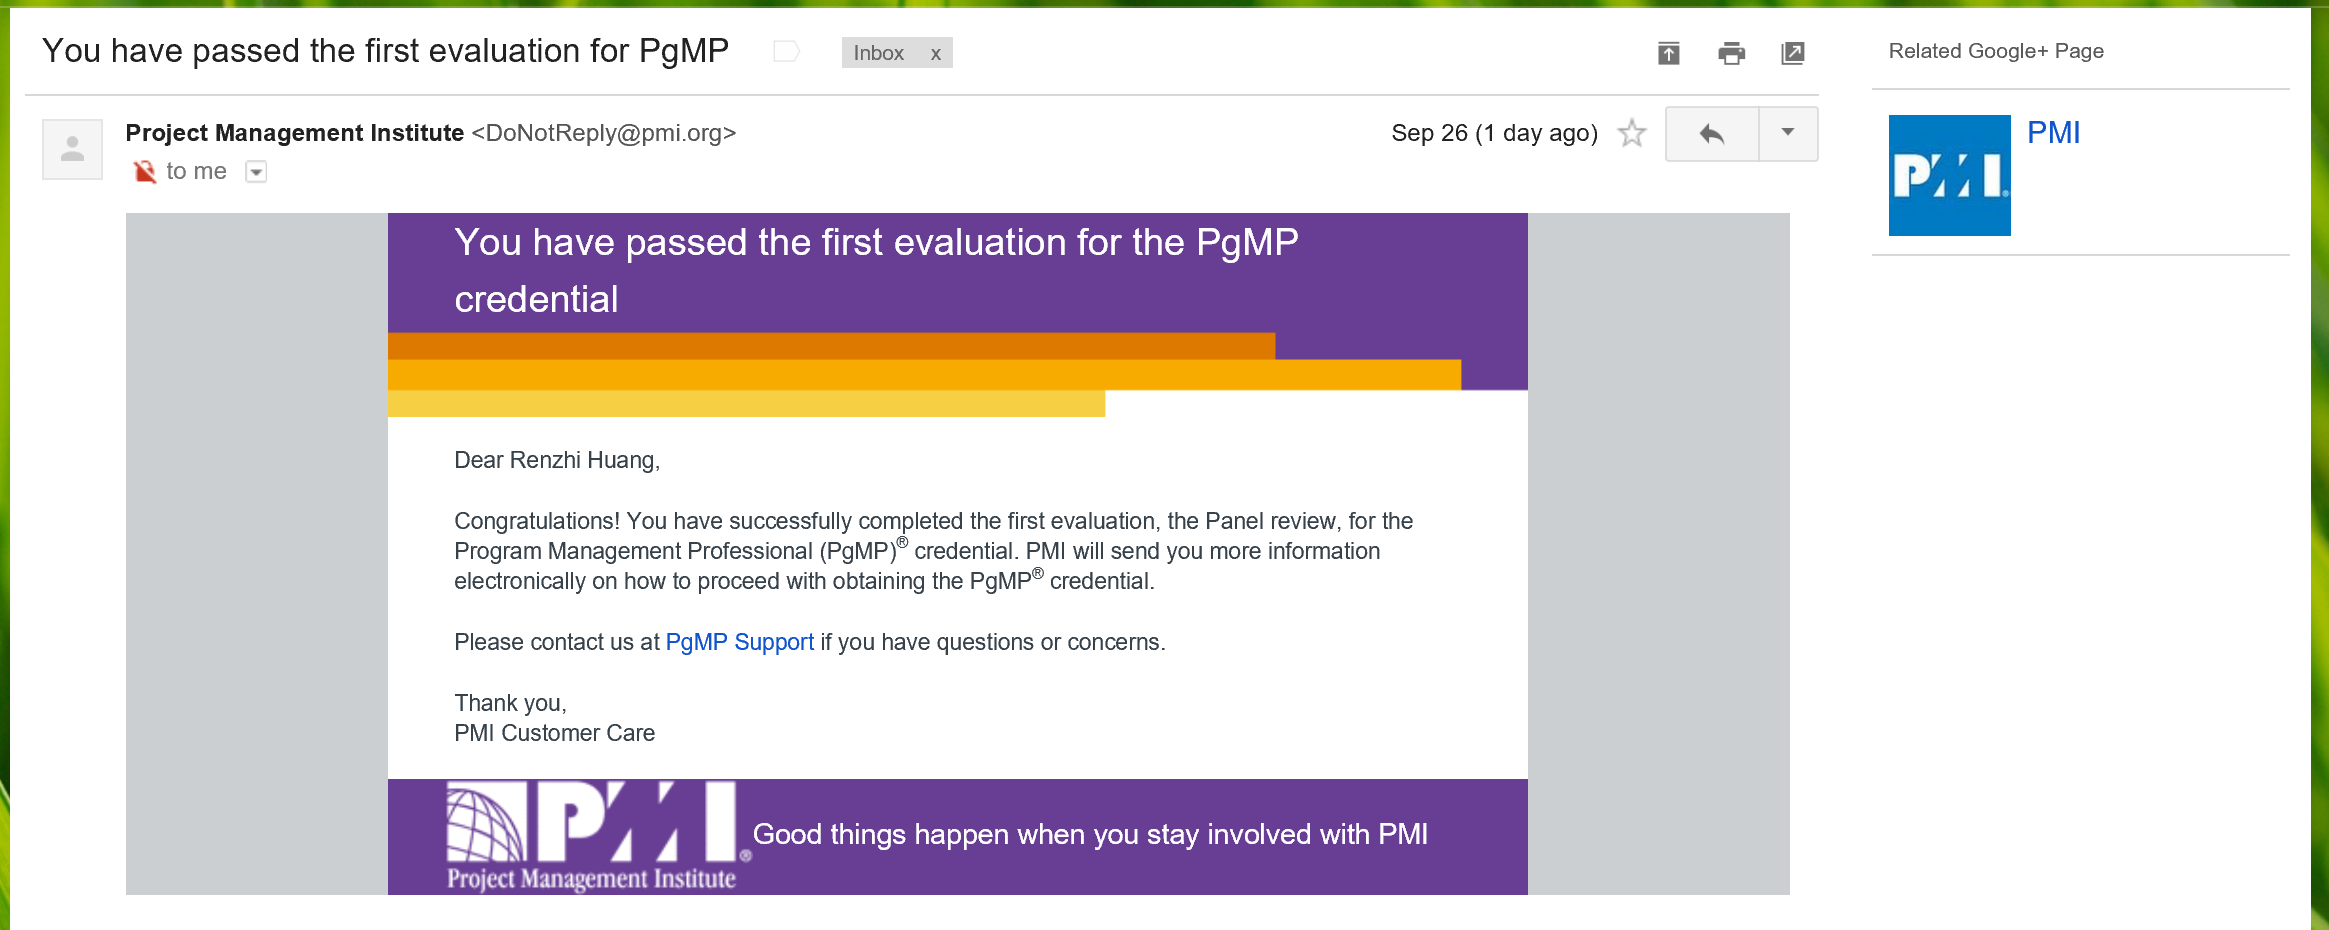 Yes! I finally cleared the super difficult PgMP Panel Review and can take the PgMP Exam! =)